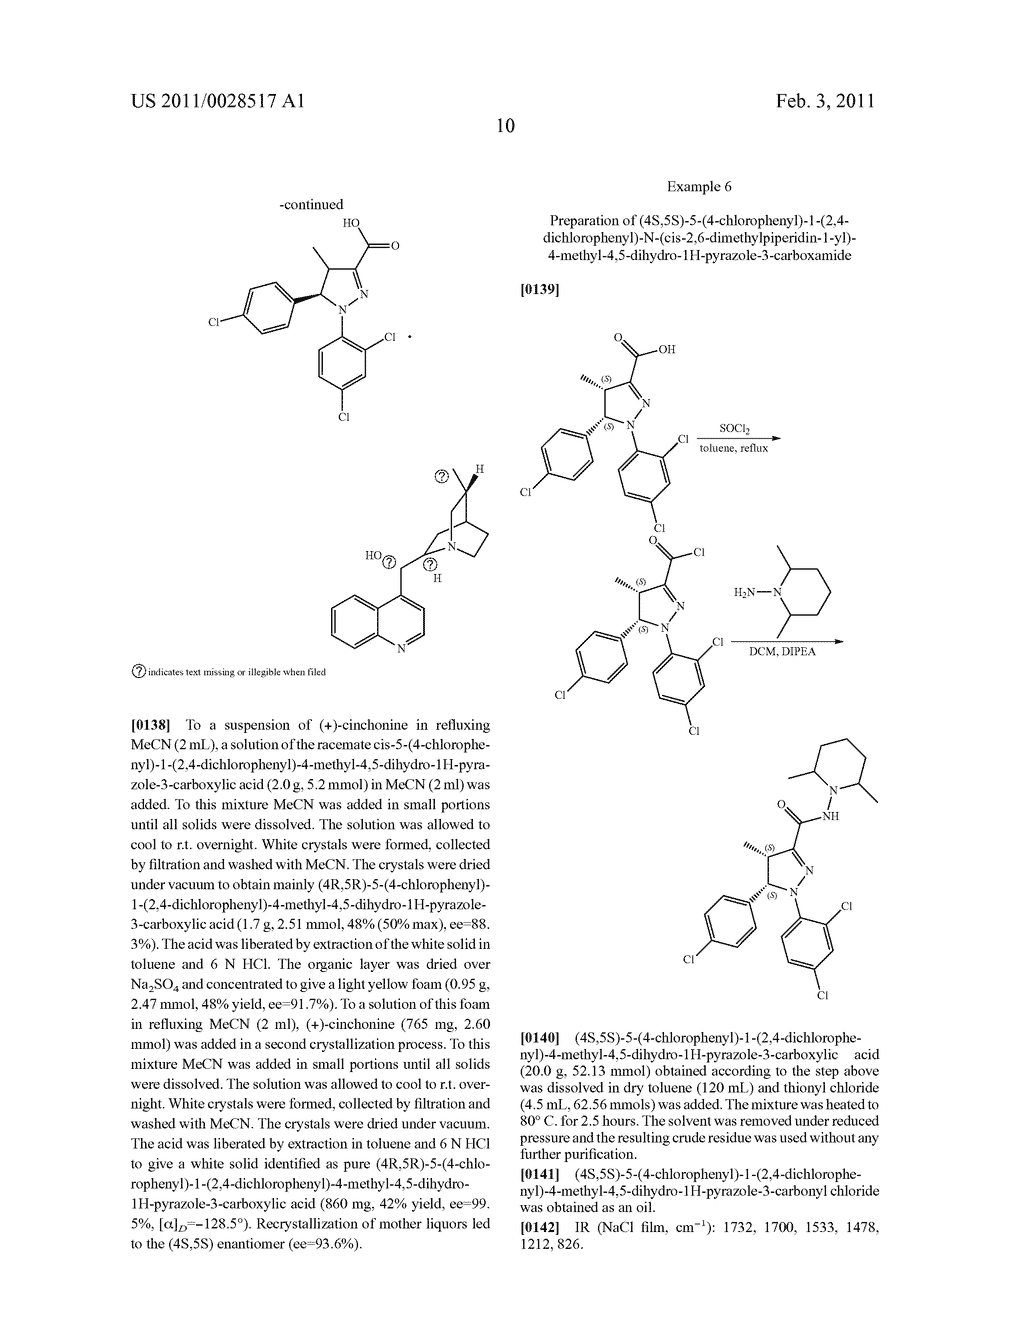 4-METHYL-4,5-DIHYDRO-1H-PYRAZOLE-3-CARBOXAMIDE USEFUL AS A CANNABINOID CB1 NEUTRAL ANTAGONIST - diagram, schematic, and image 18